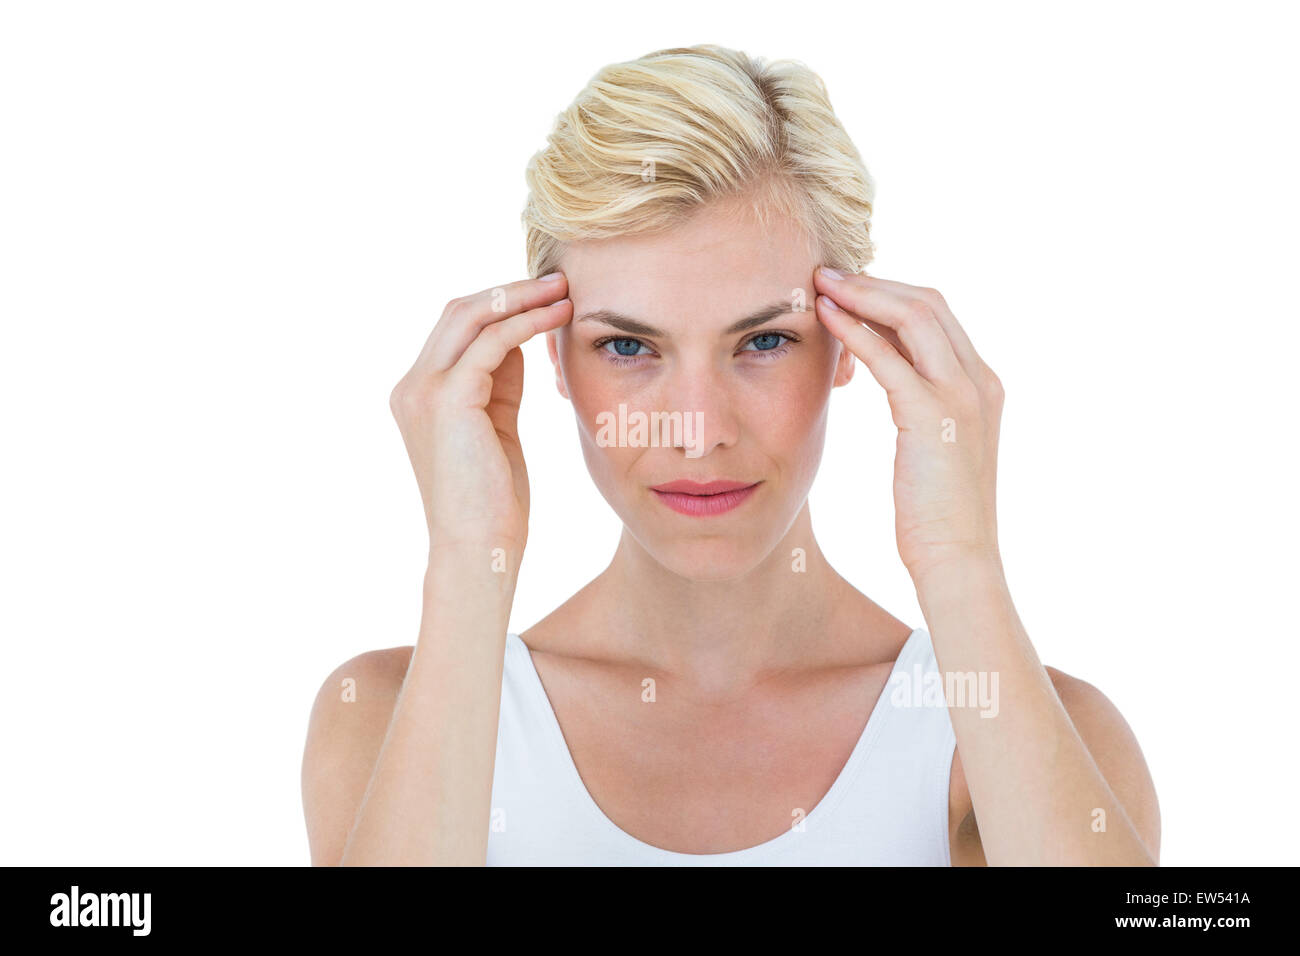 Blonde woman frowning and looking at camera Stock Photo